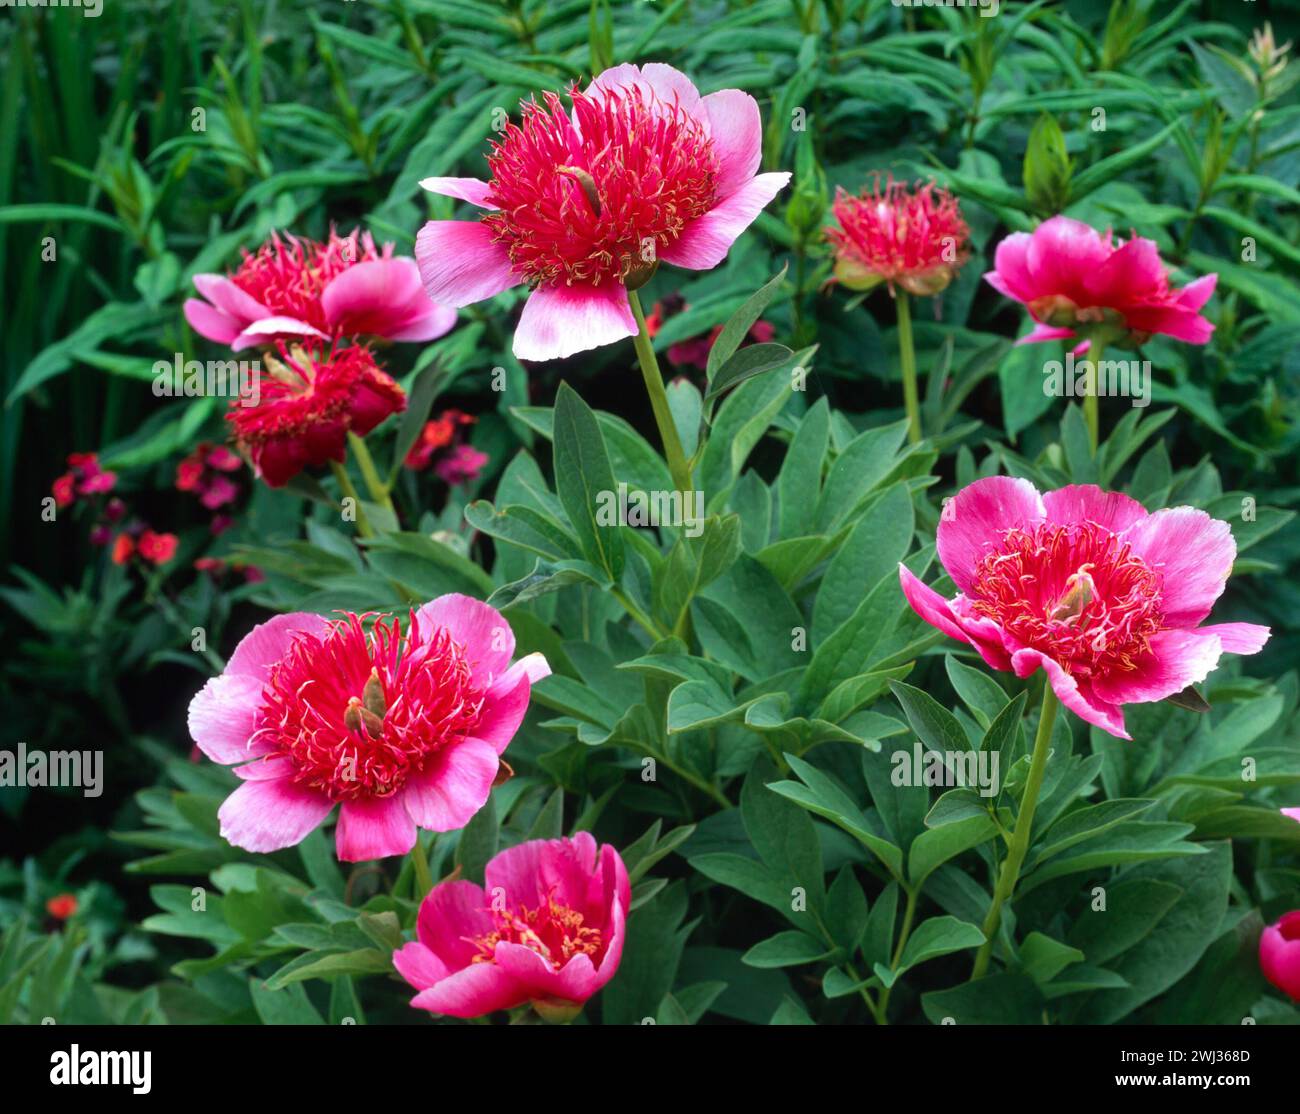 Large, bright red peony flowers with green foliage growing in English garden, England, UK Stock Photo